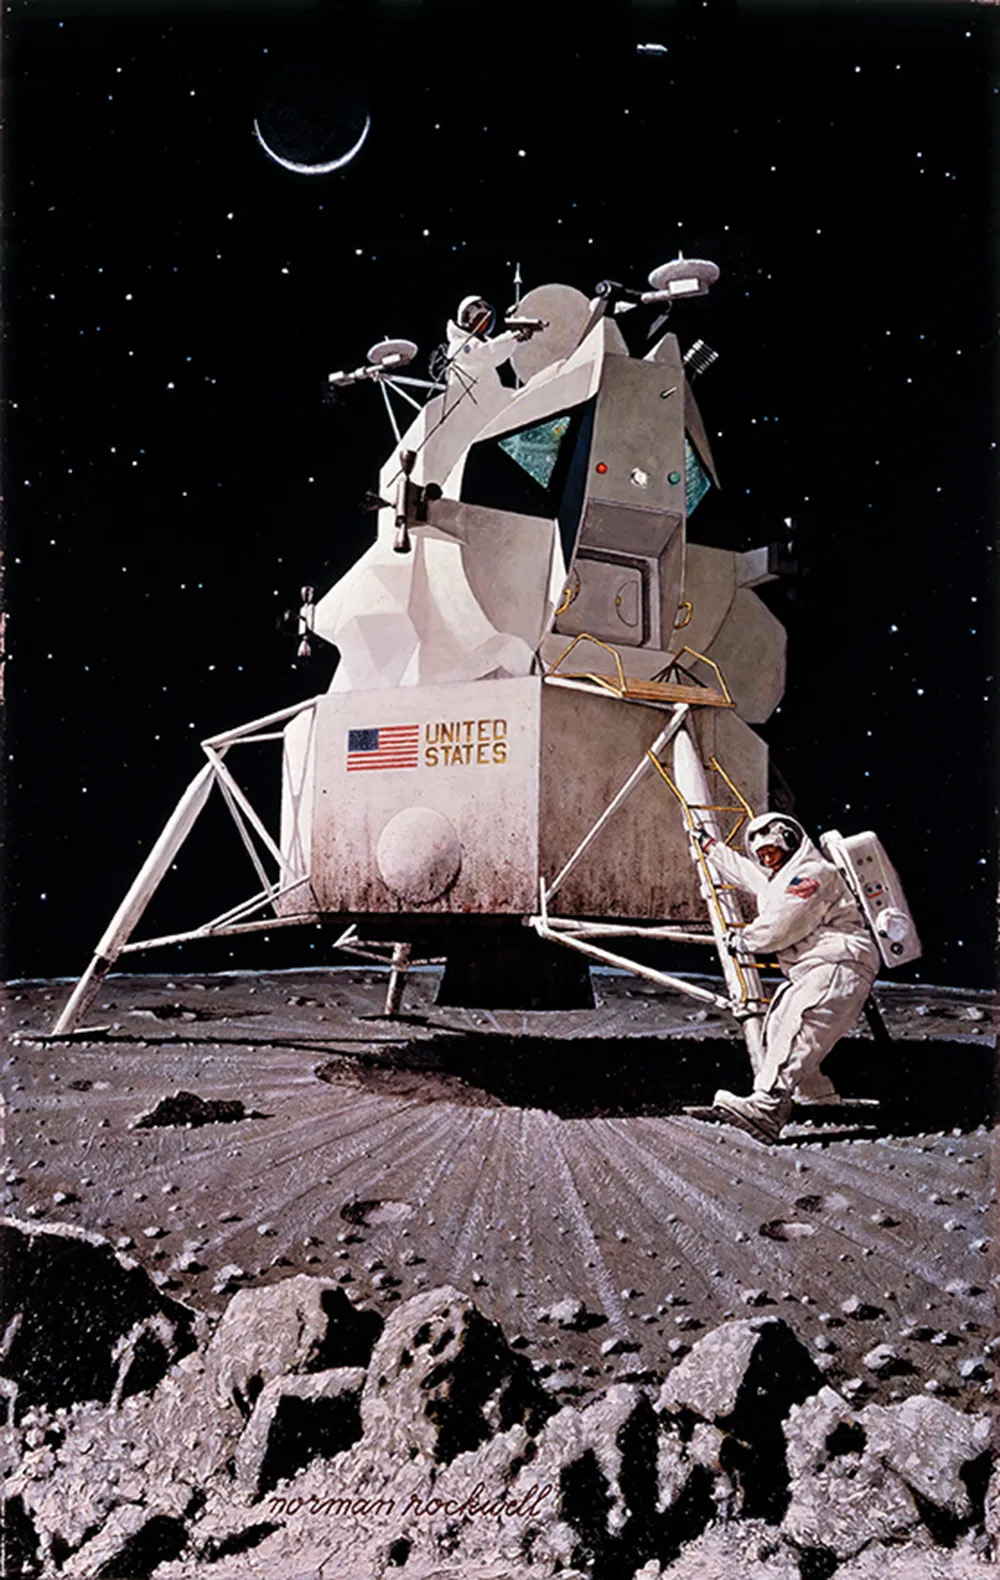 Painting by Norman Rockwell depicting the Moon landing